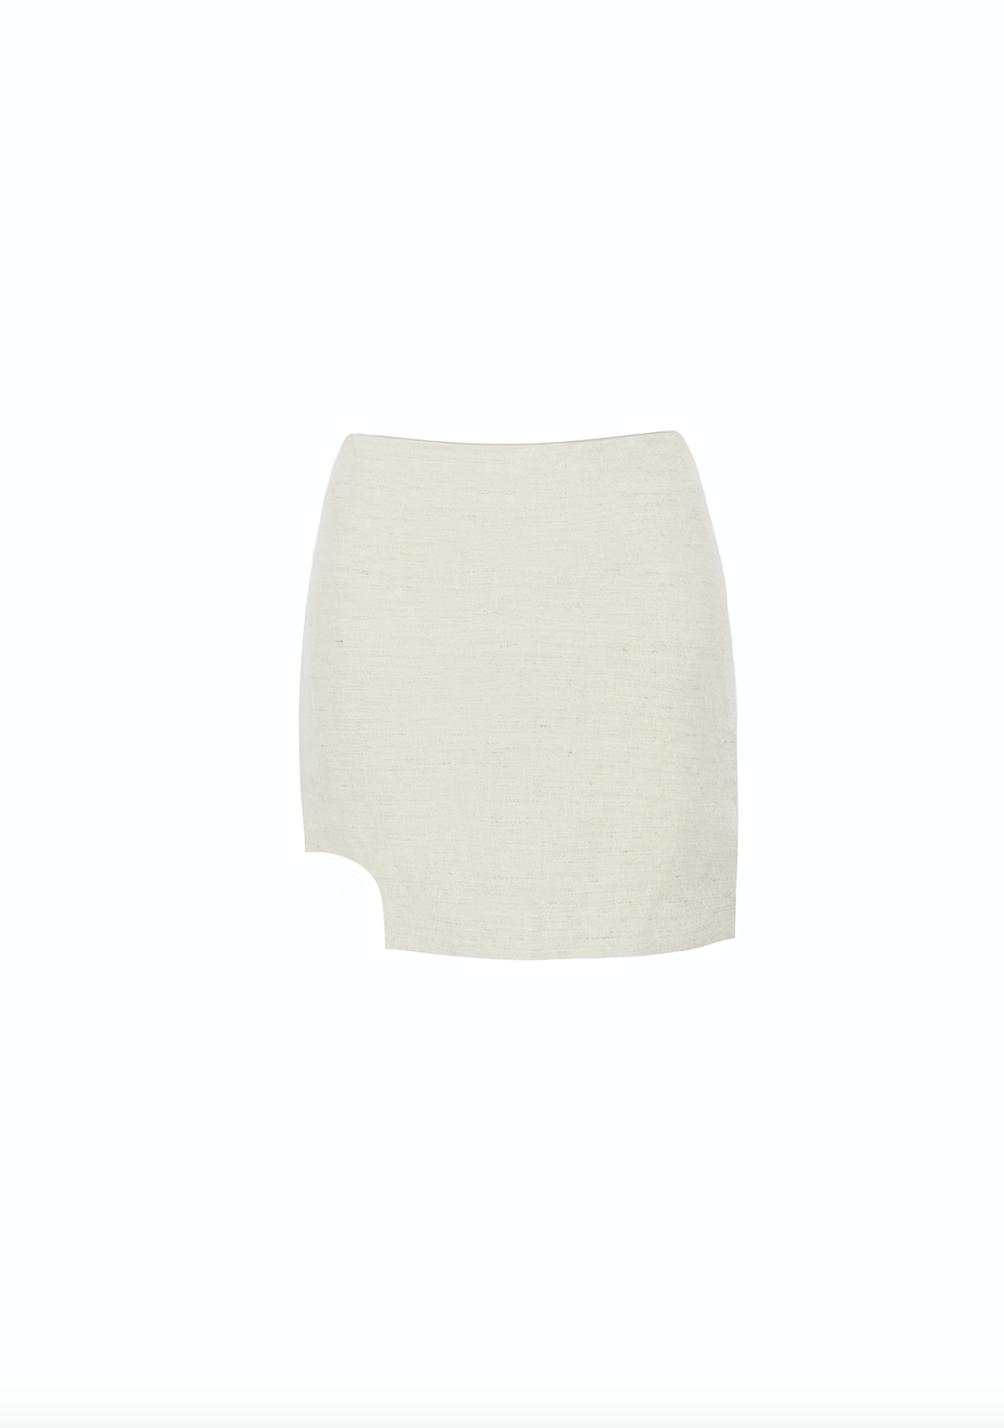 Dipped waist mini skirt in Nude with side round slit.